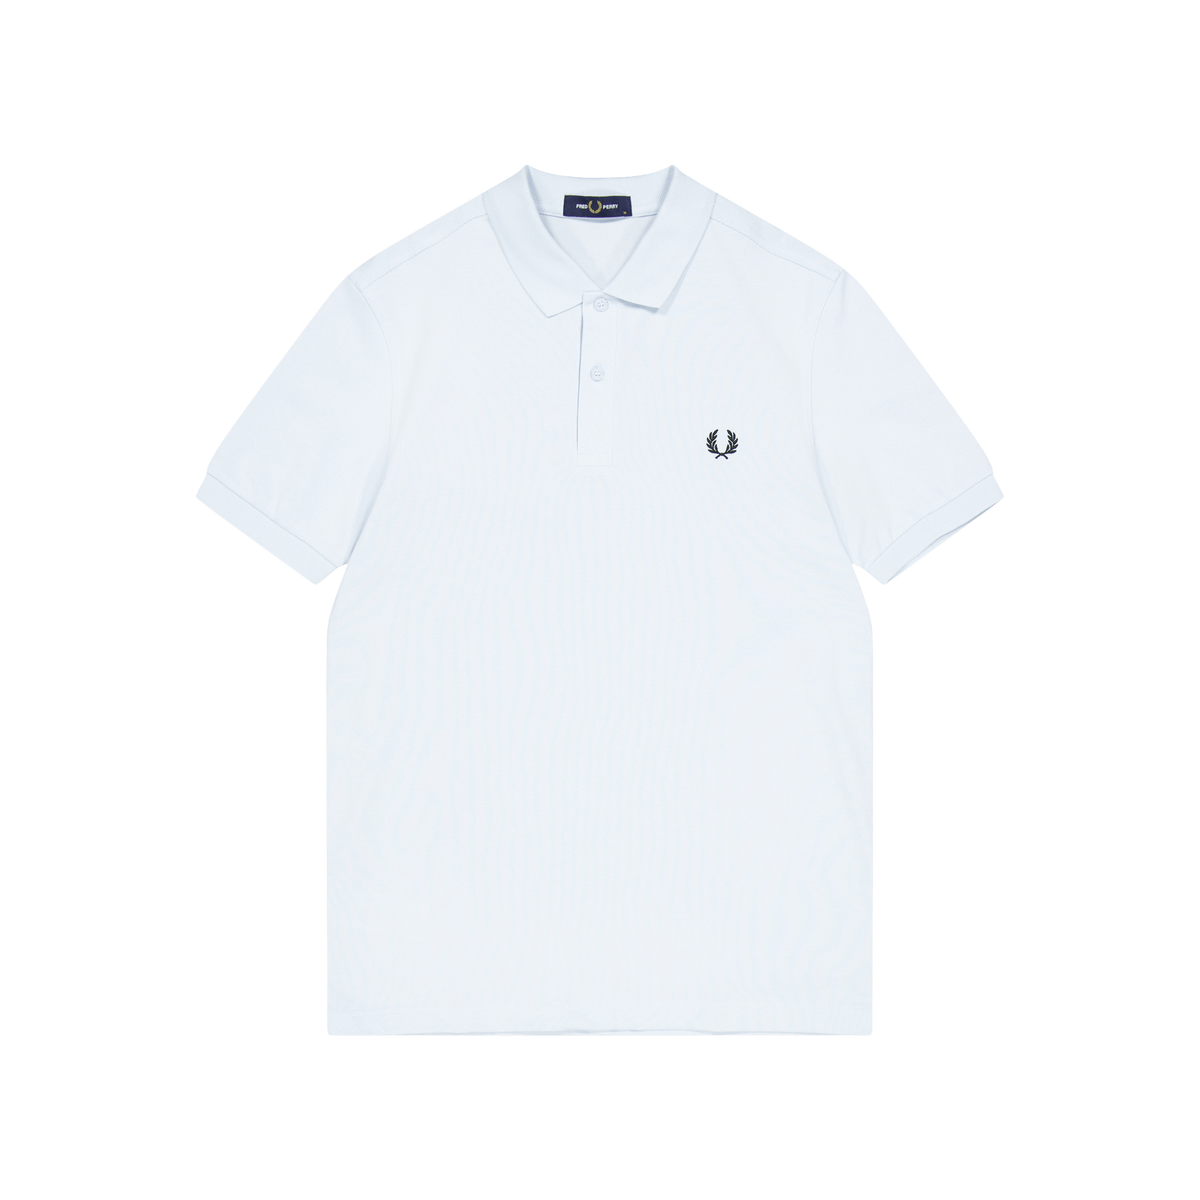 Fred Perry Plain Fred Perry Shirt R30 Ice